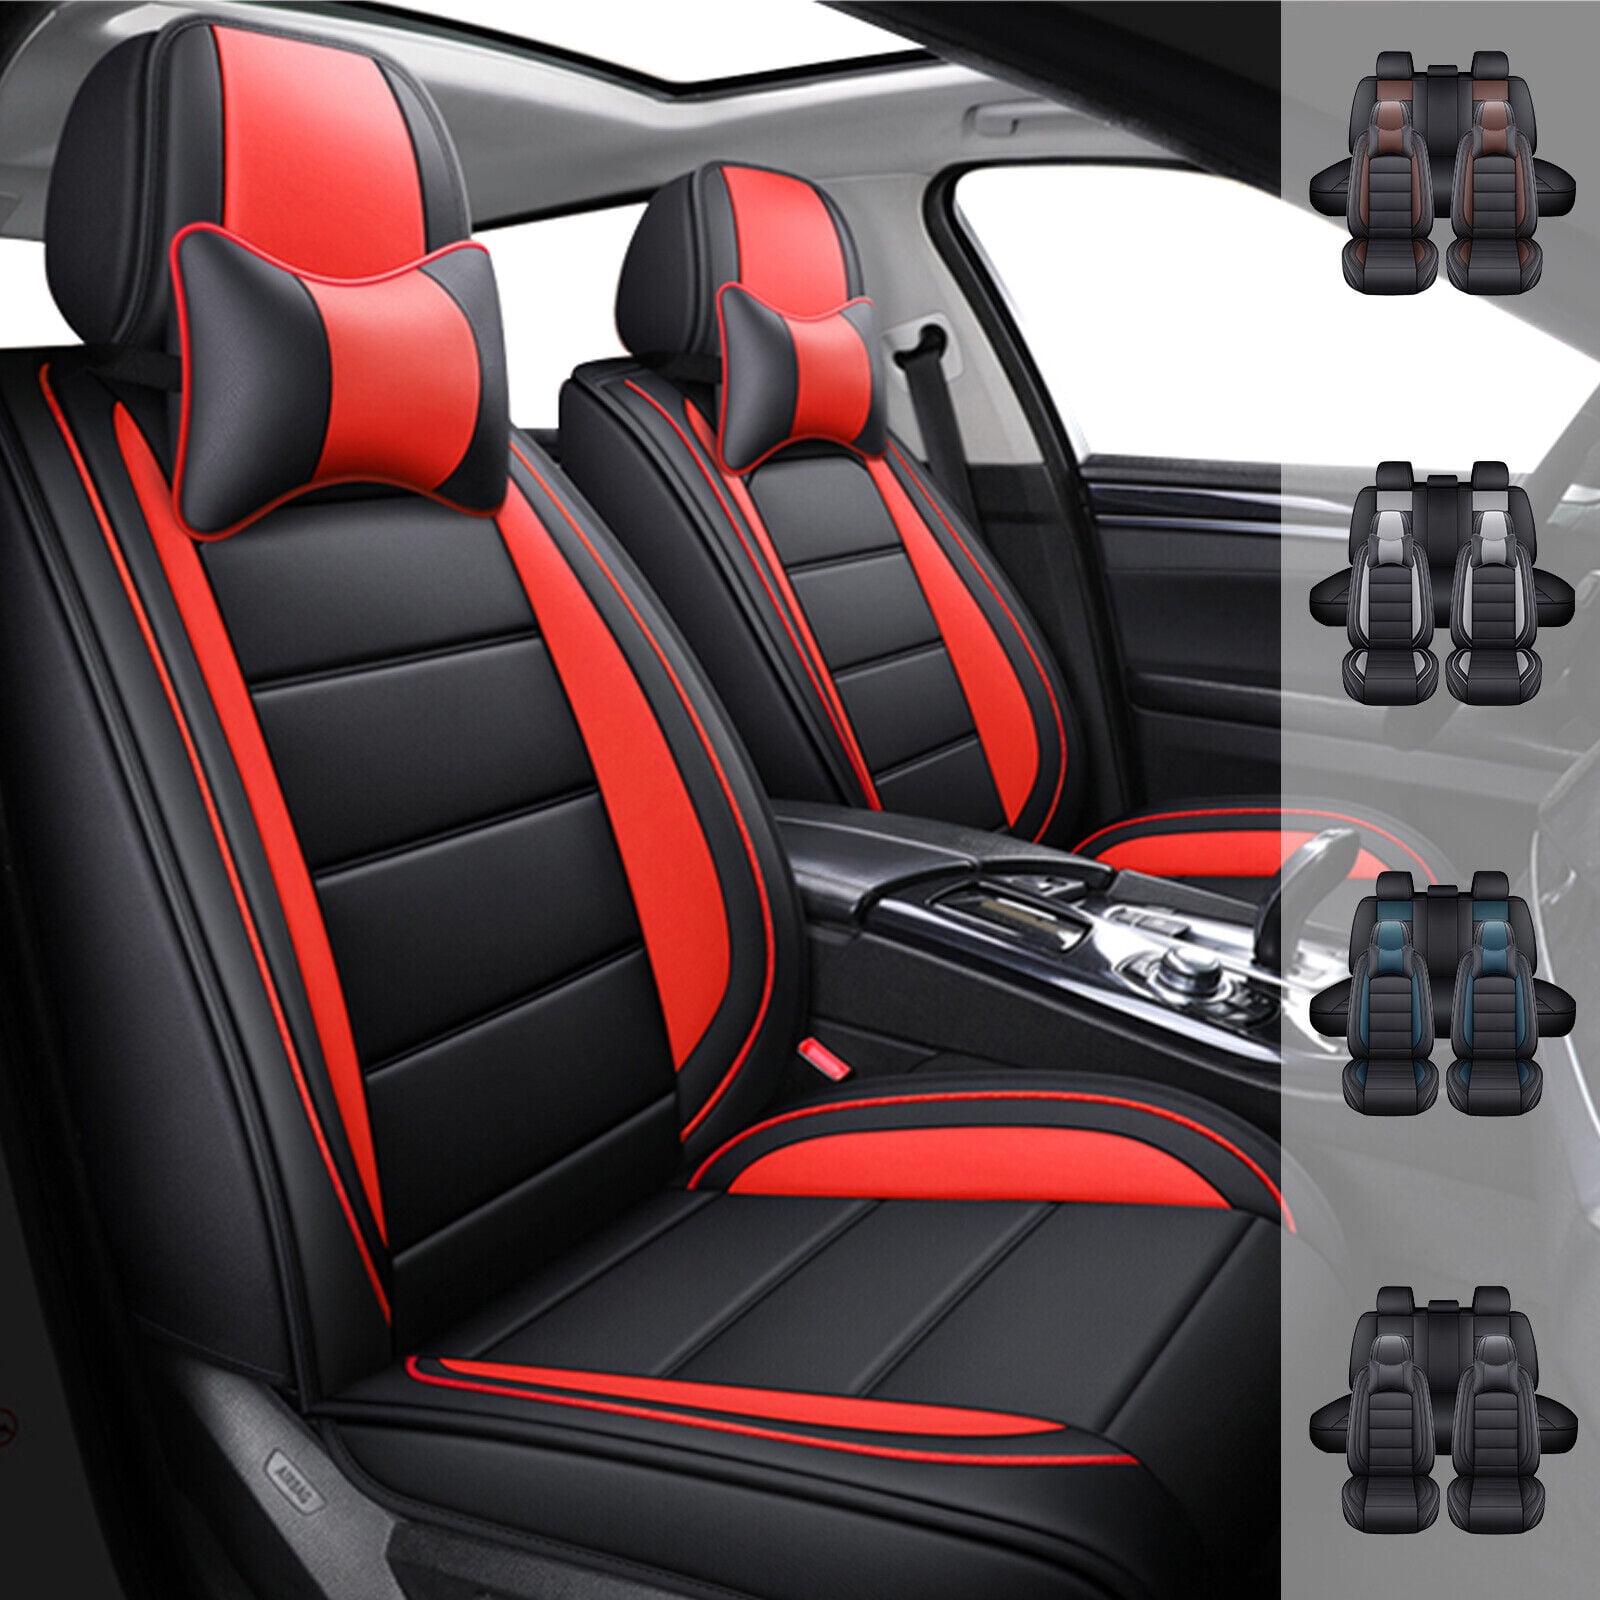 Premium PU Leather Red Seat Cushions For Honda Civic 11th Gen With Original  Design And Perfect Protection Internal Accessories Included From Lshl520,  $312.35